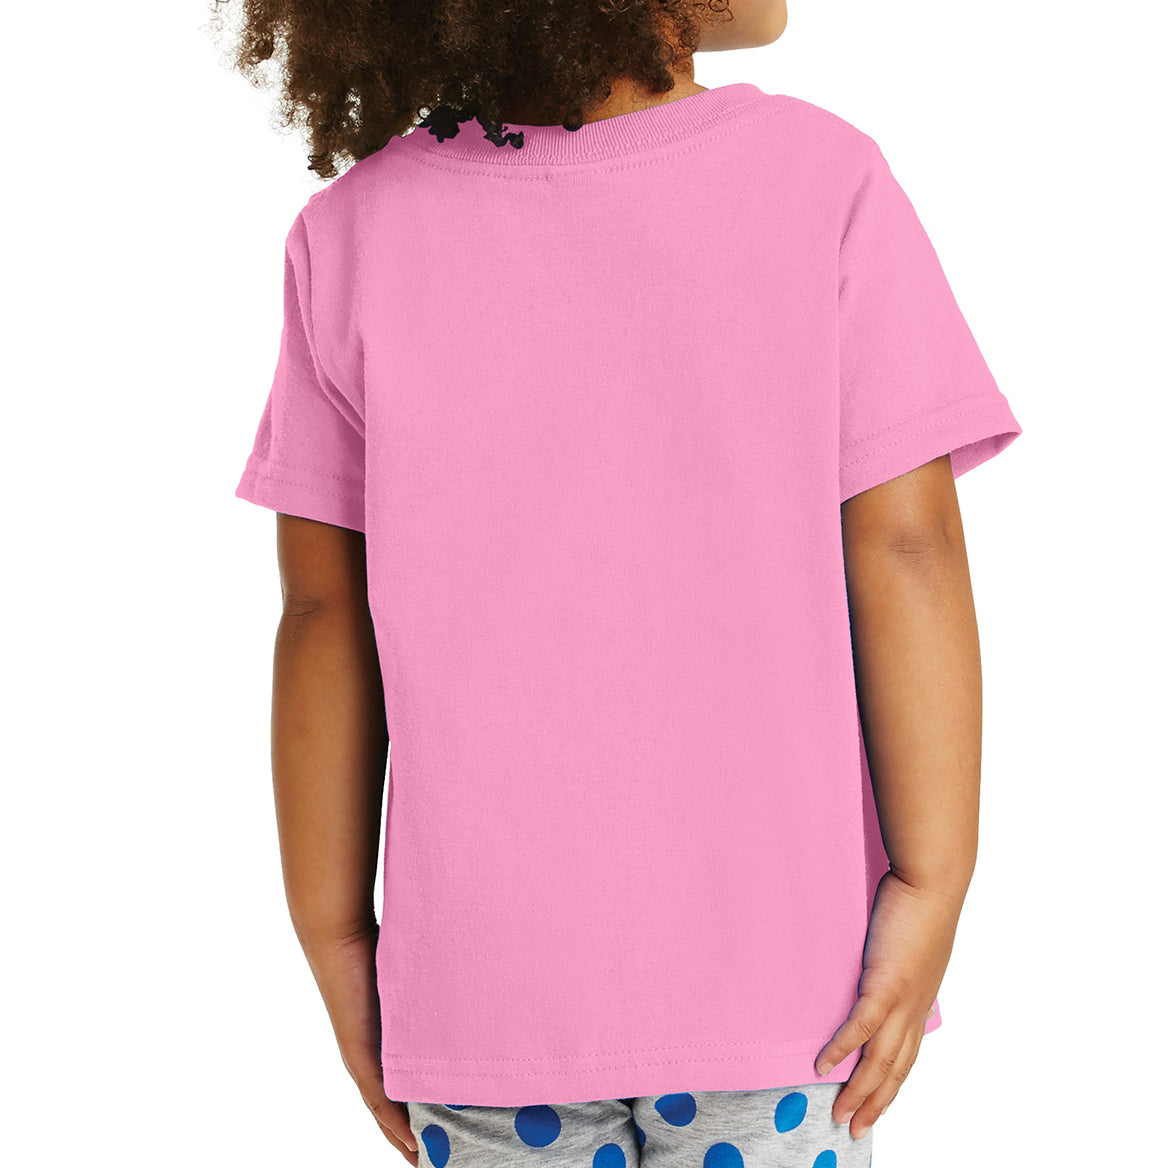 Toddler Core Cotton Tee - Candy Pink